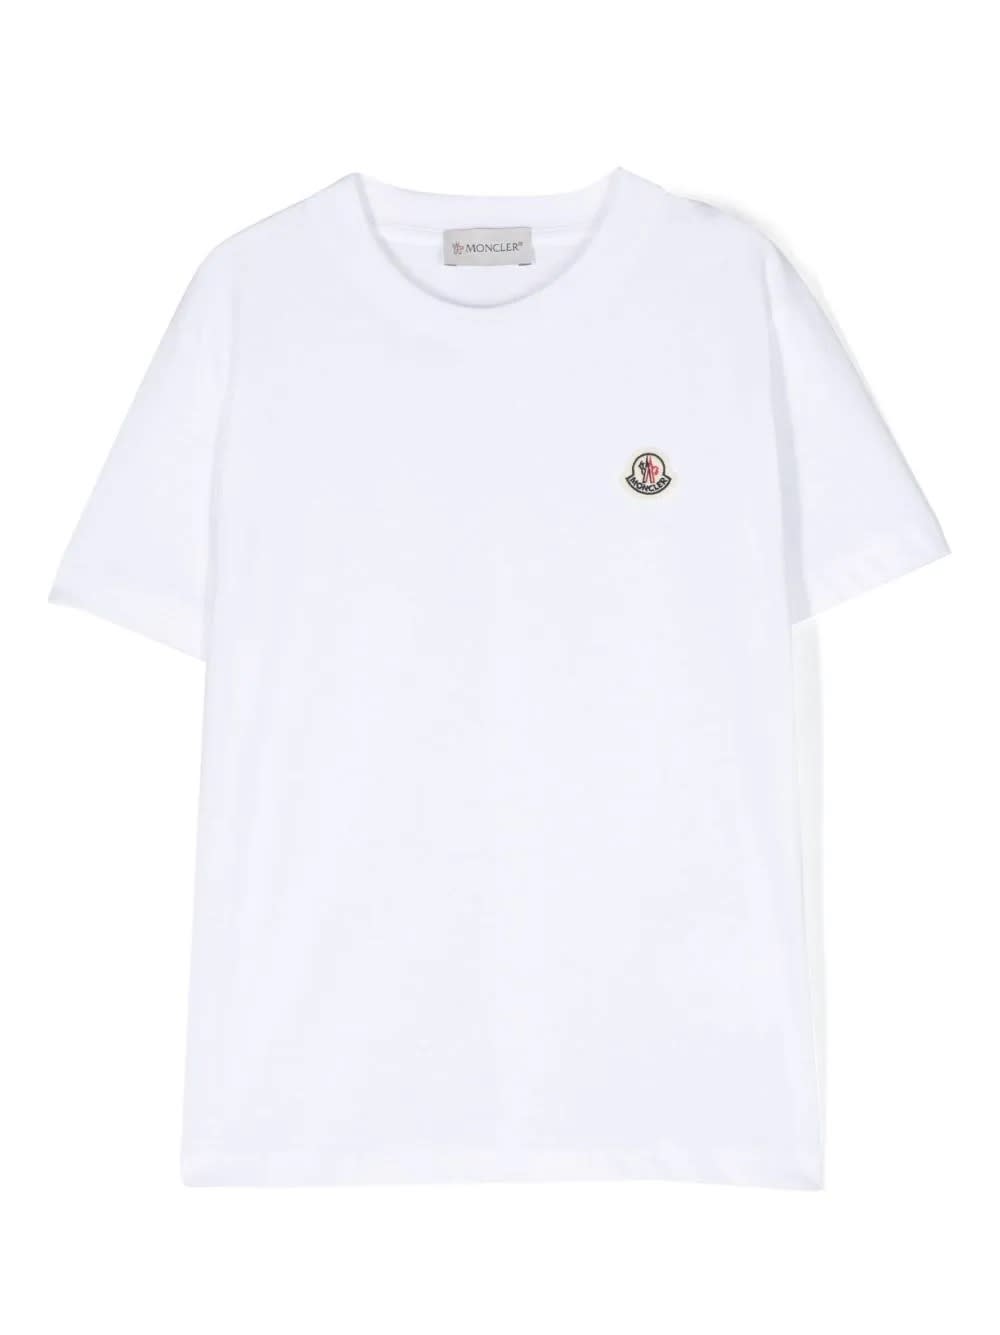 Moncler Kids' White T-shirt With Logo Patch